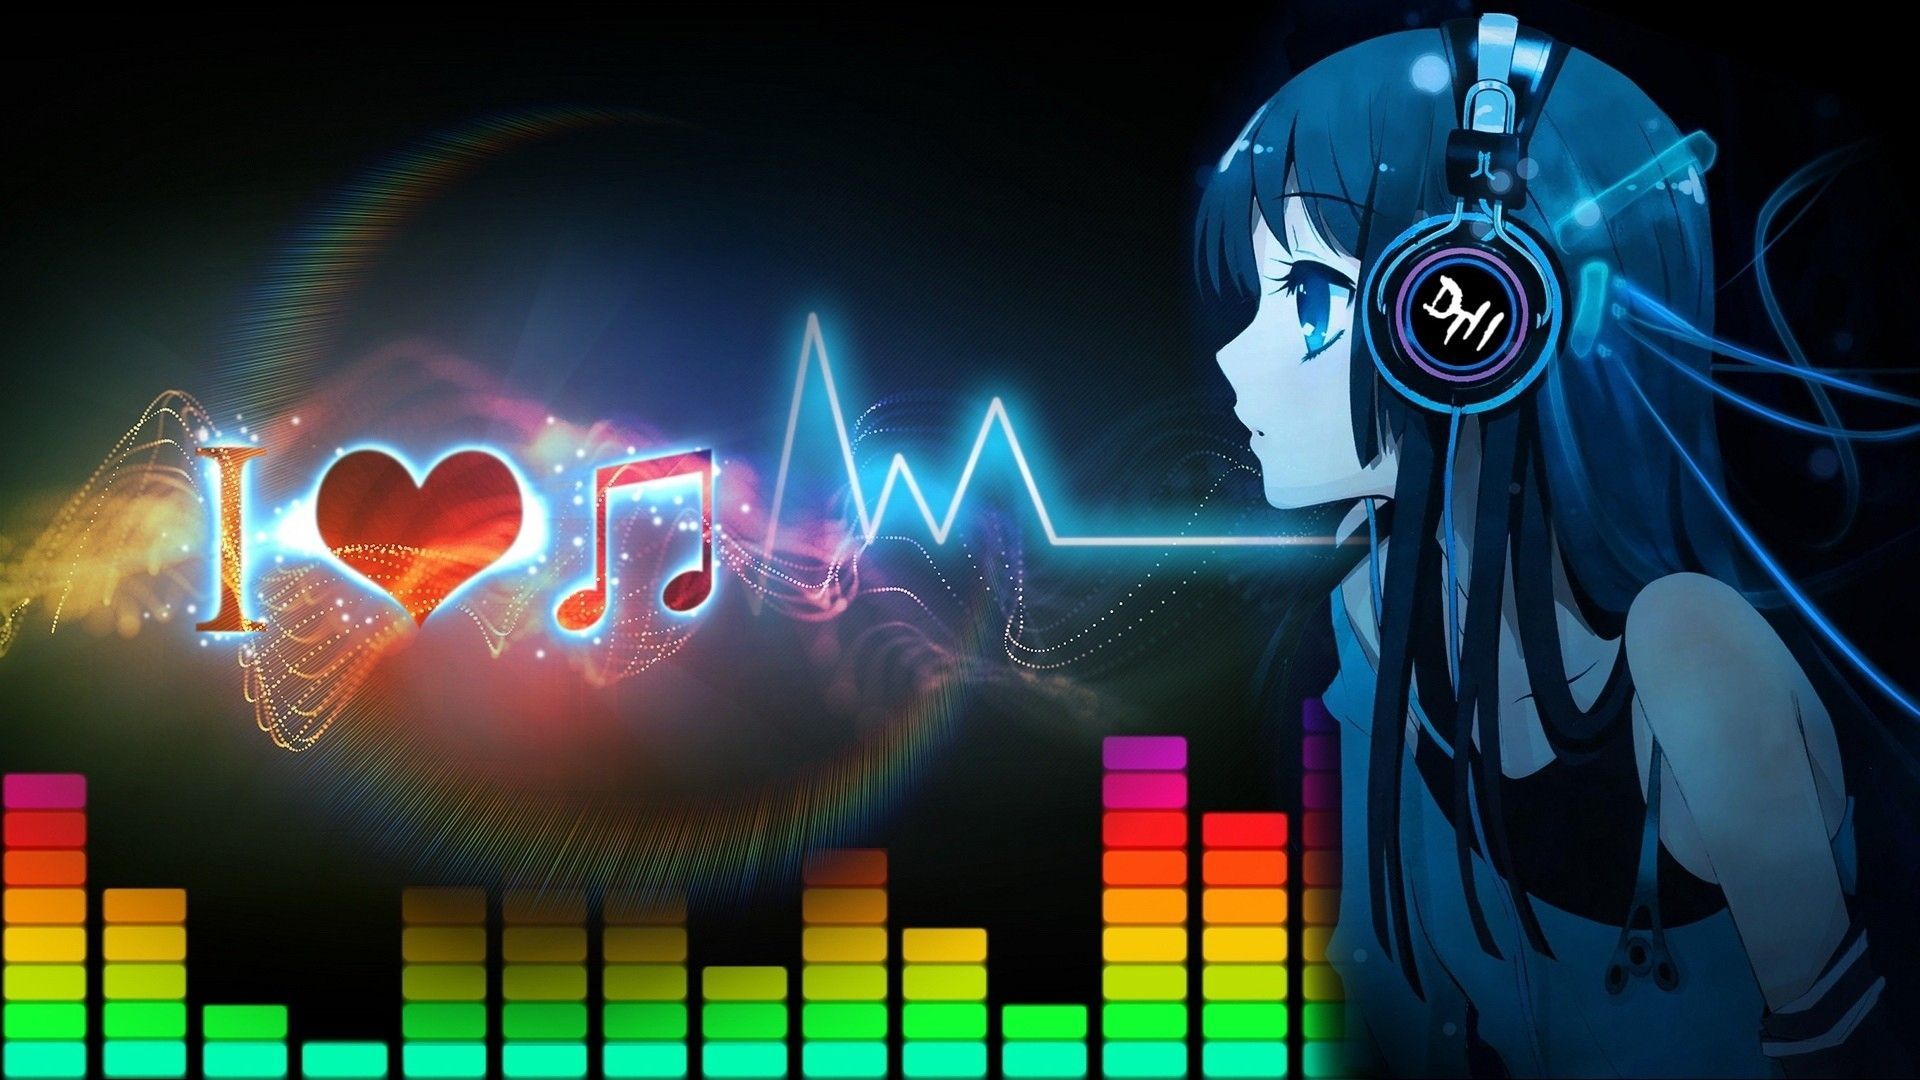 Neon Effect Girl Anime Wallpapers - Wallpaper Cave